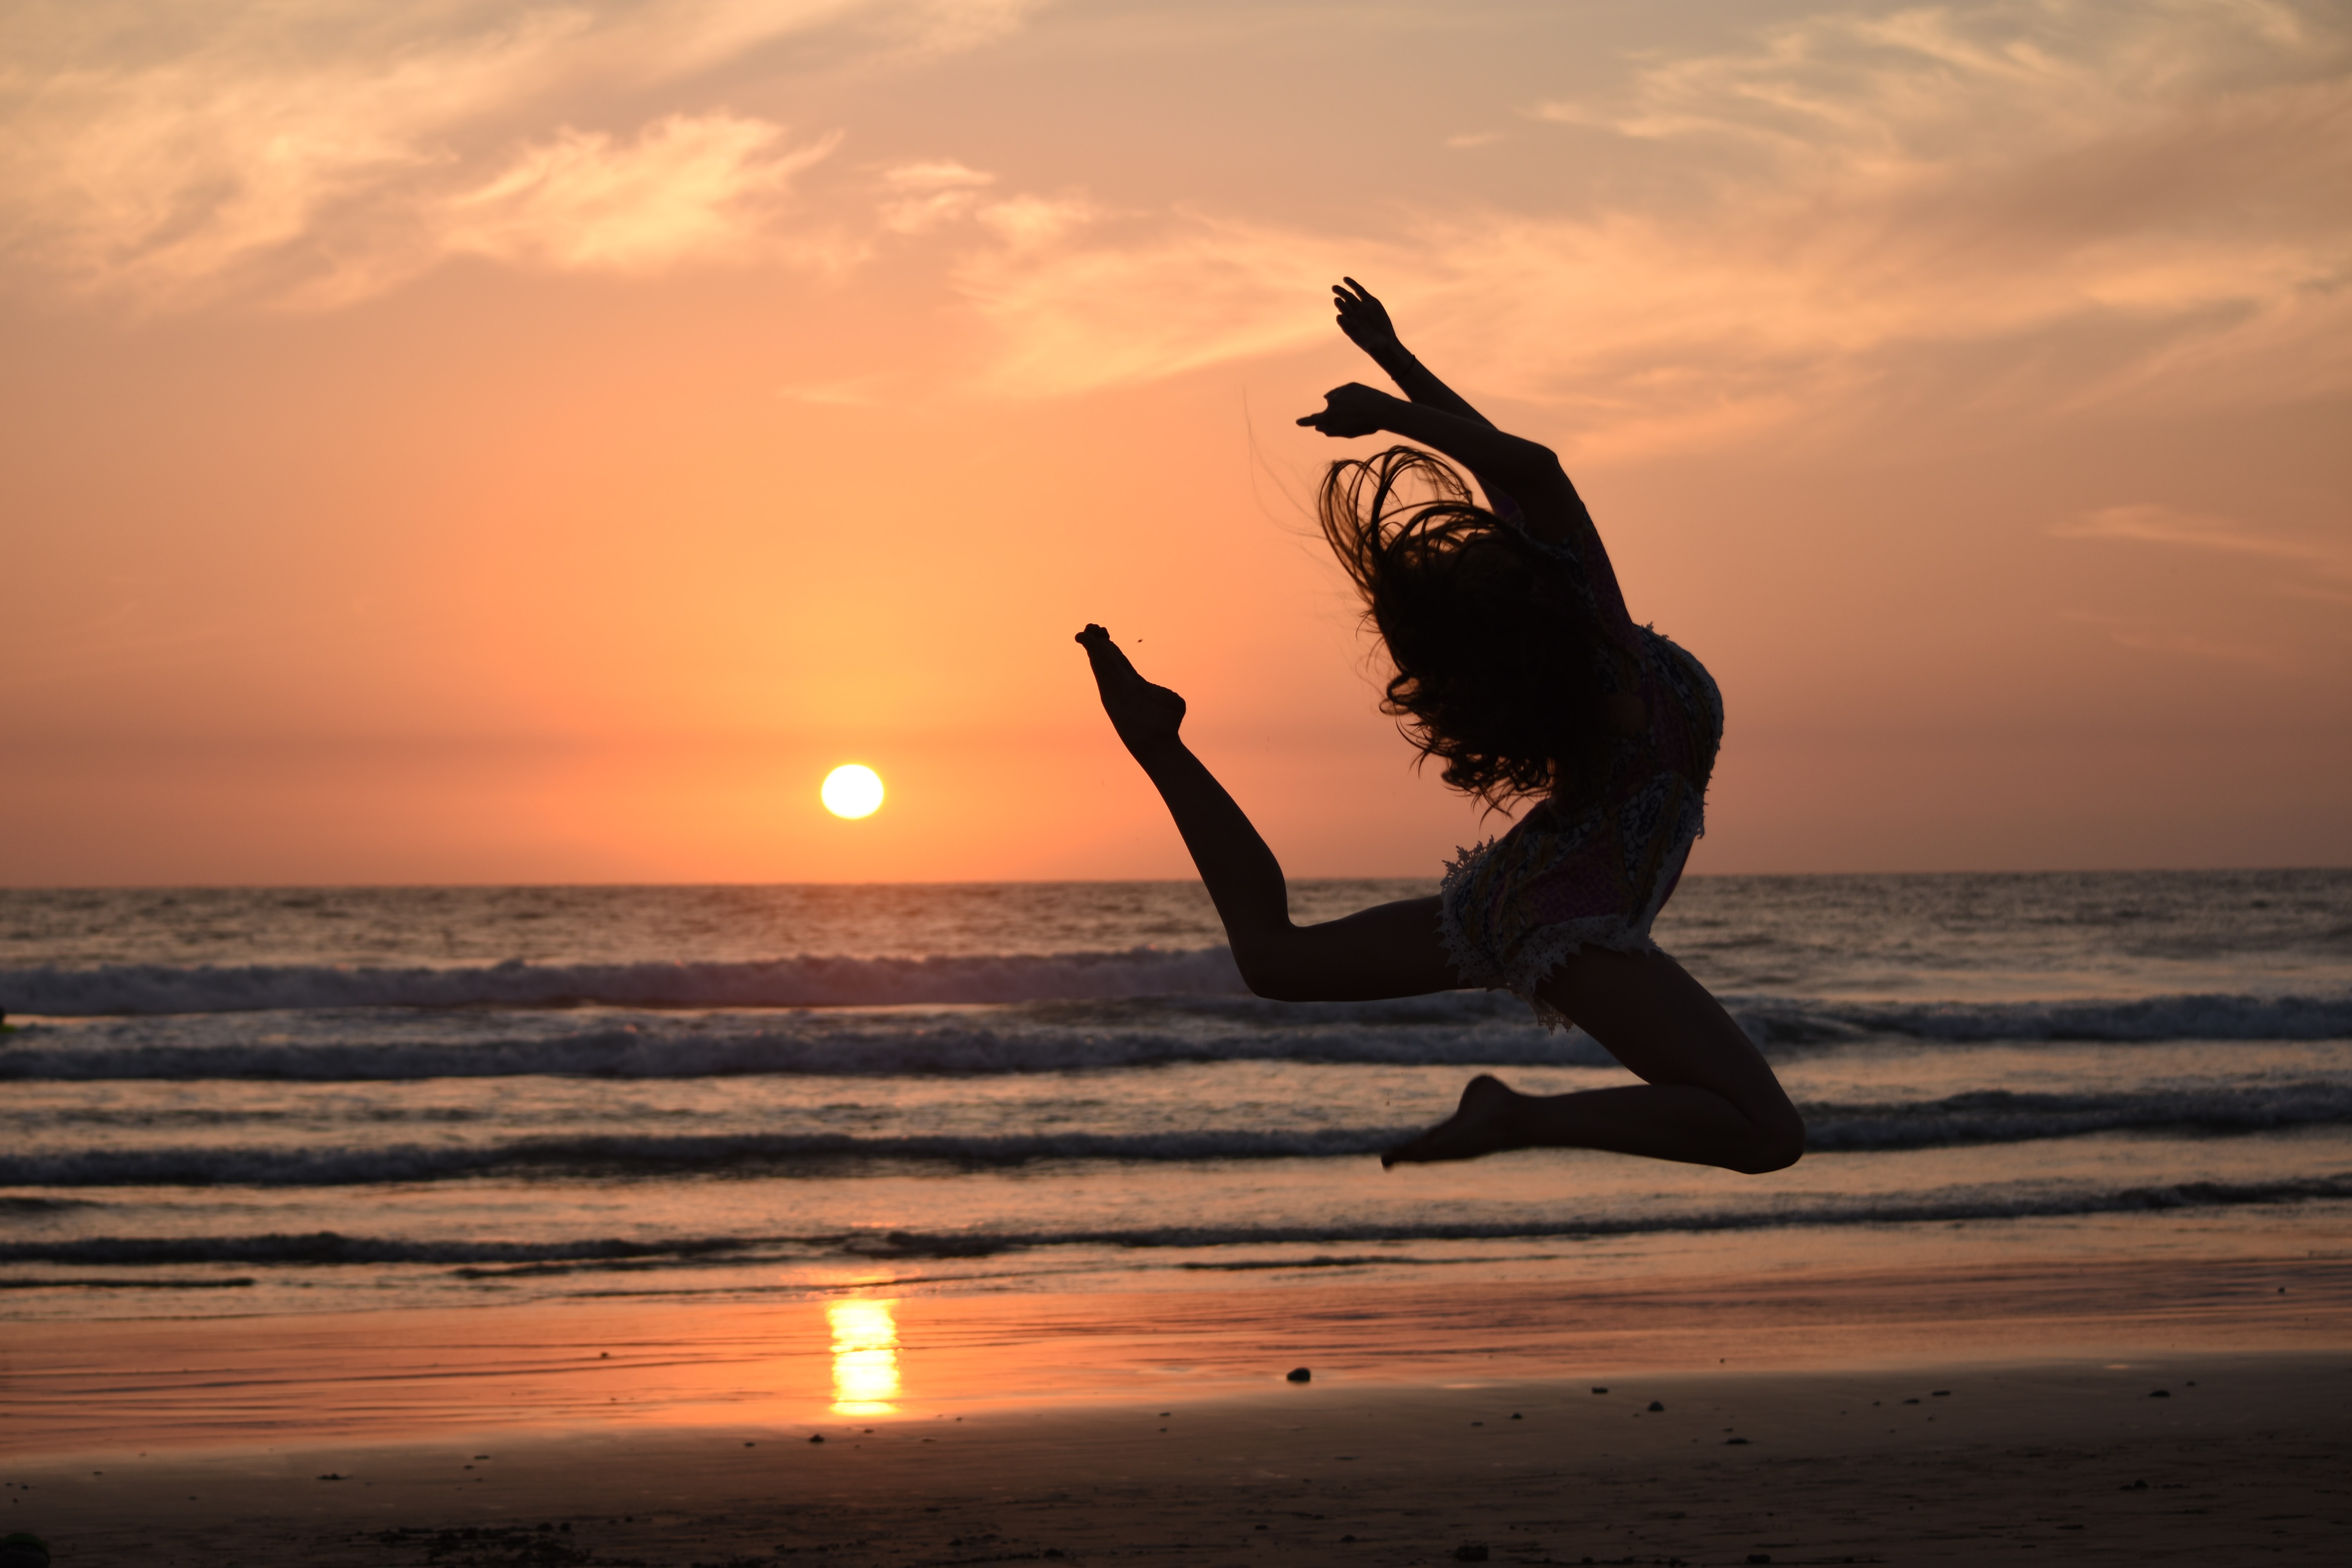 Dancer in silhouette on beach in sunset